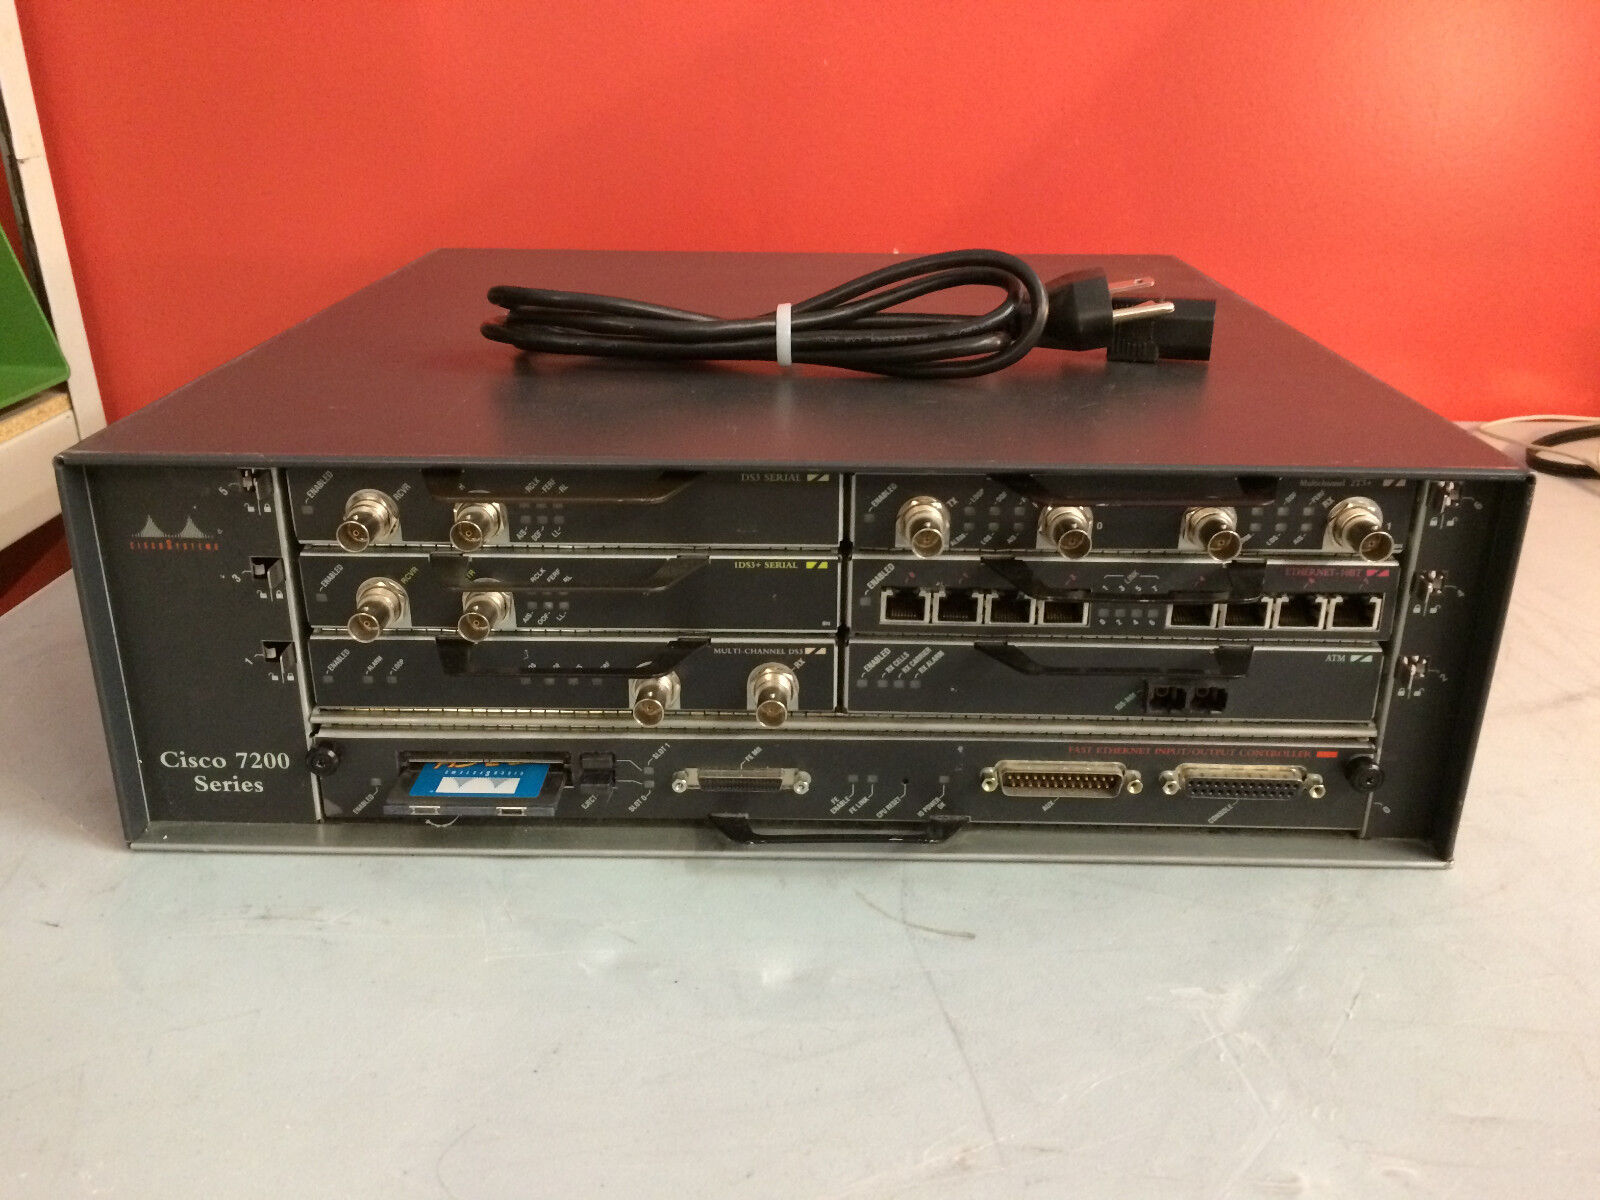 Cisco 7200 Series System w/ Network Processing Engine 200 & Chassis Etc.